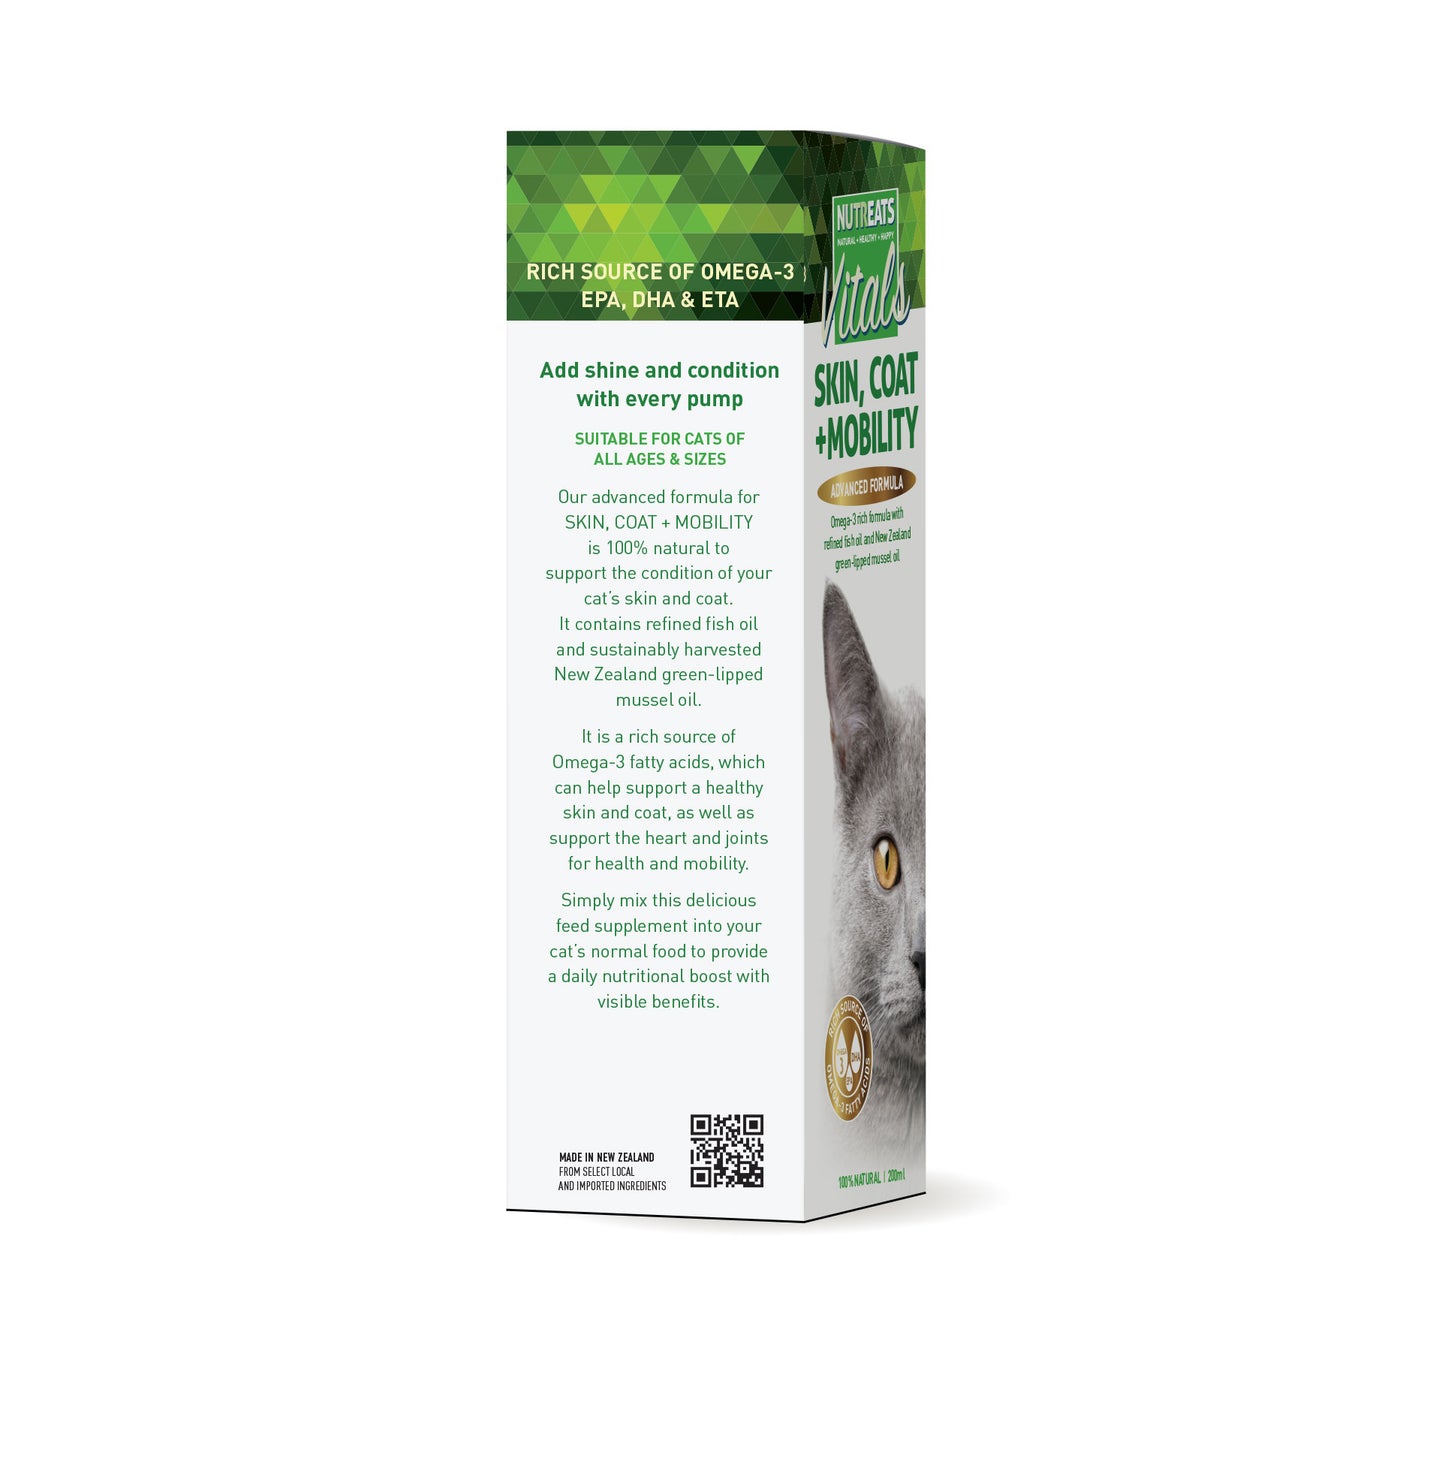 Nutreats Skin, Coat and Mobility oil for cats - supplement for healthy skin, coat and supporting mobility in cats. 100% natural nutritional supplement. Supporting healthy joints and mobility in cats. Supports healthy heart and brain function. Promotes naturally healthy shiny coat. 100% natural grain free supplement for cats.